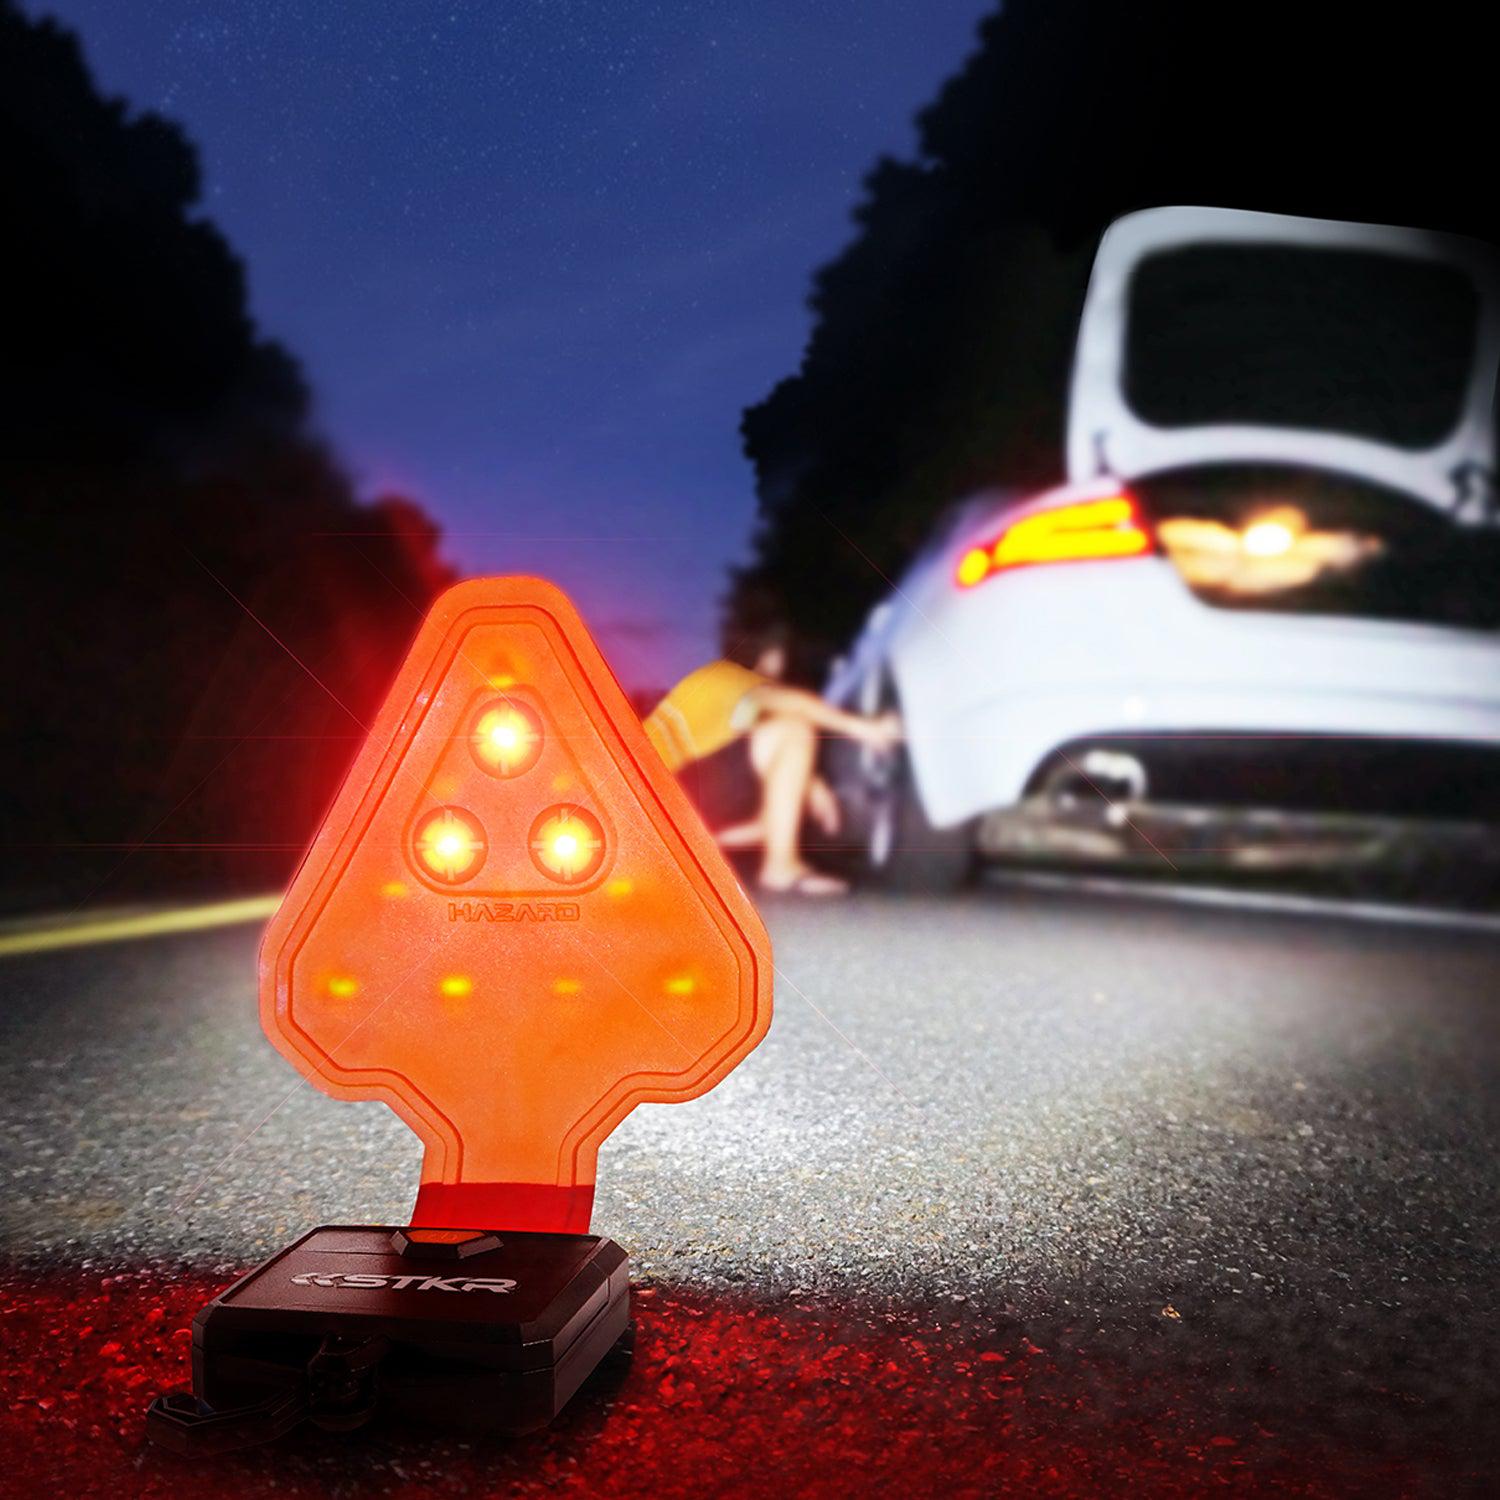 STKR FLEXIT Auto lighting up a female inspecting her car's driver's side rear tire in a nighttime roadside setting. 3 red LEDs are facing oncoming traffic to warn them of the emergency.